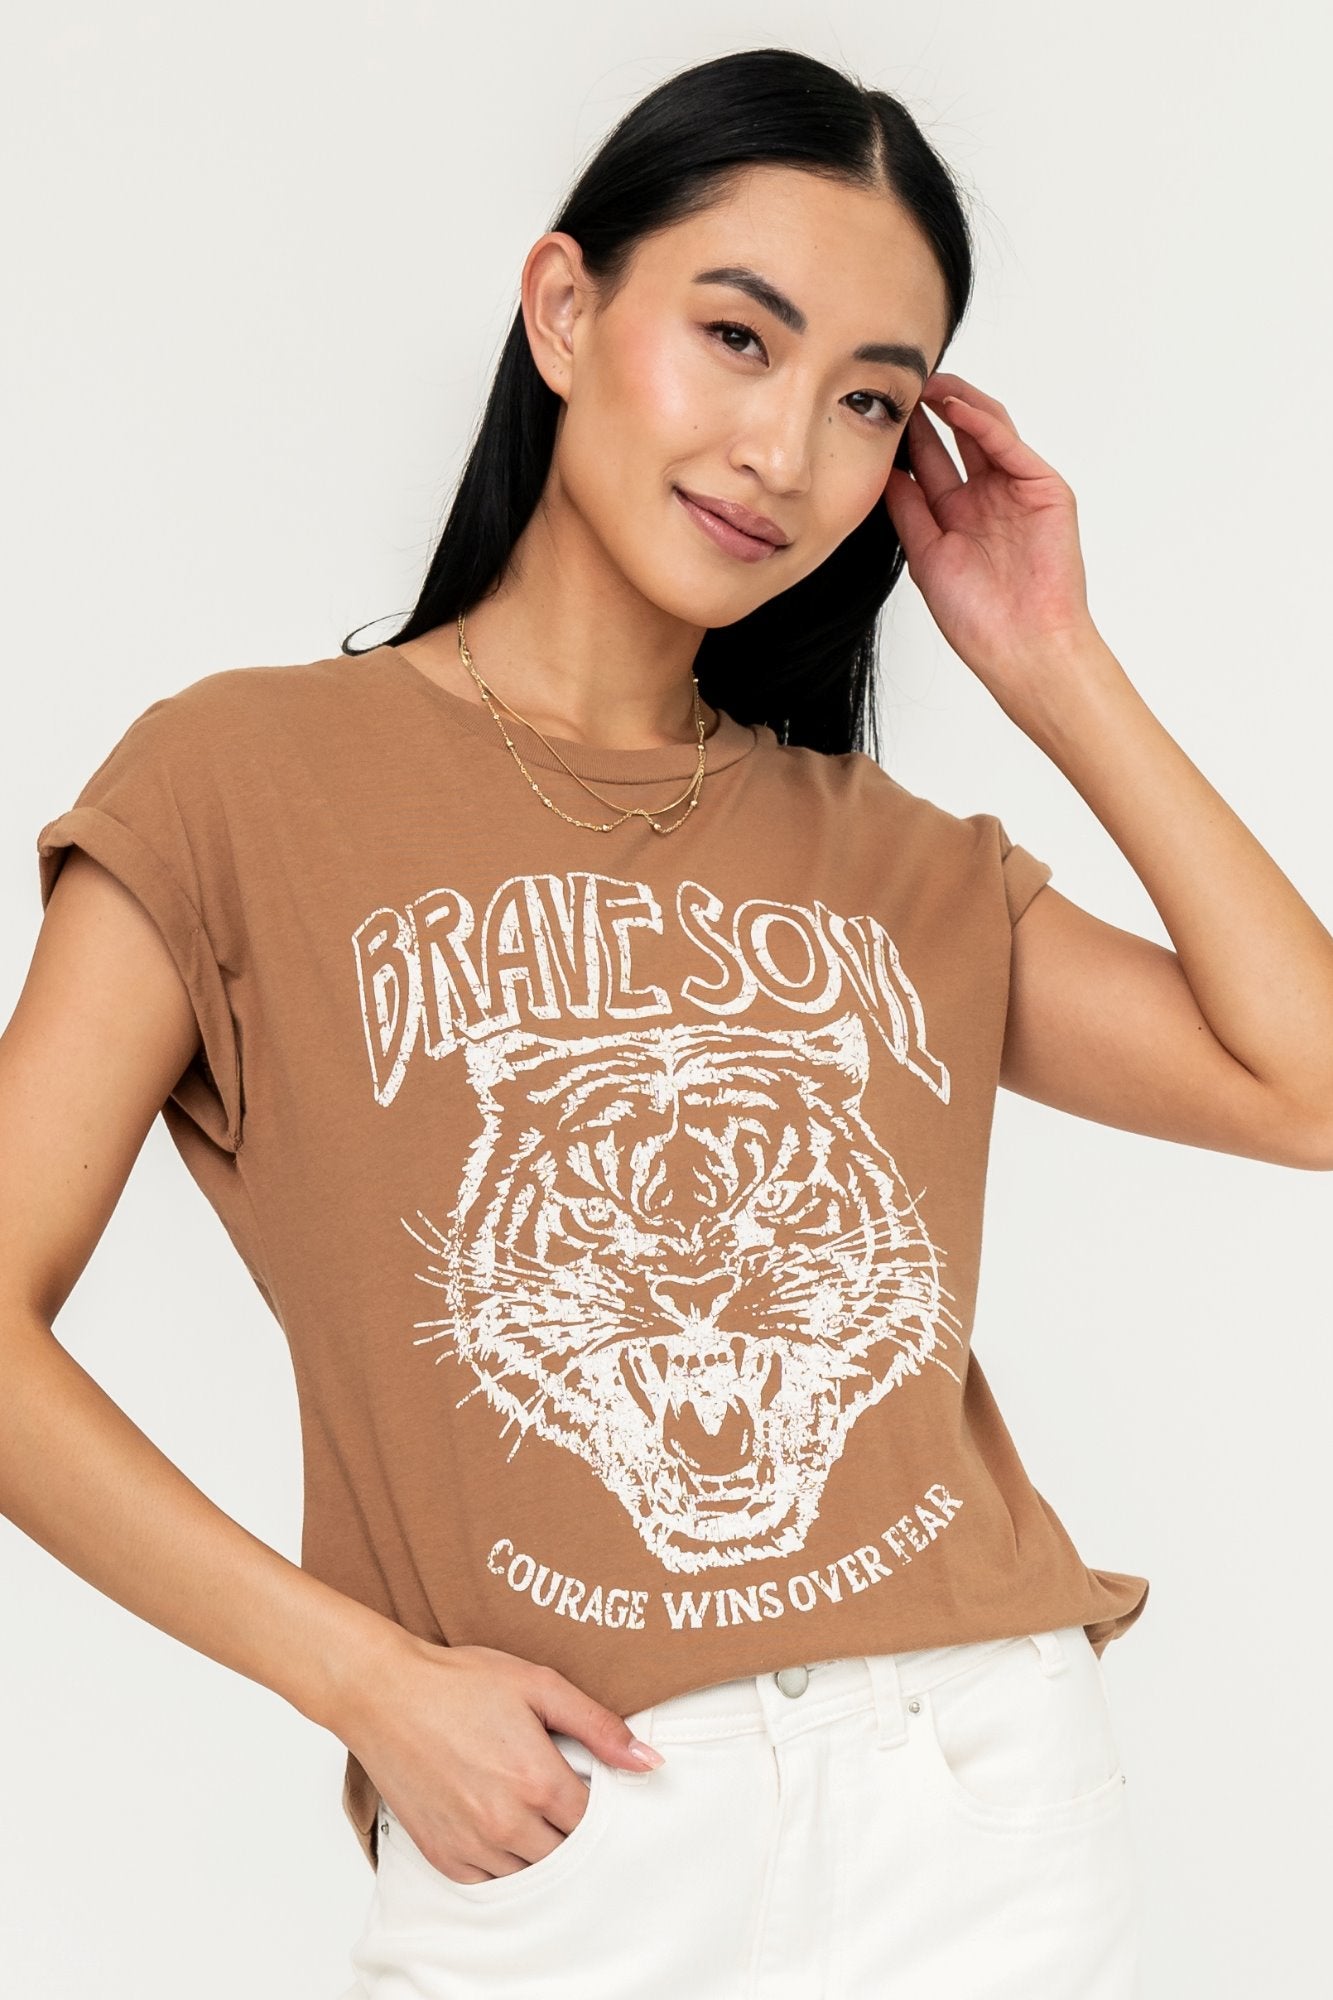 The Brave Soul Tee in Camel Clothing Holley Girl 